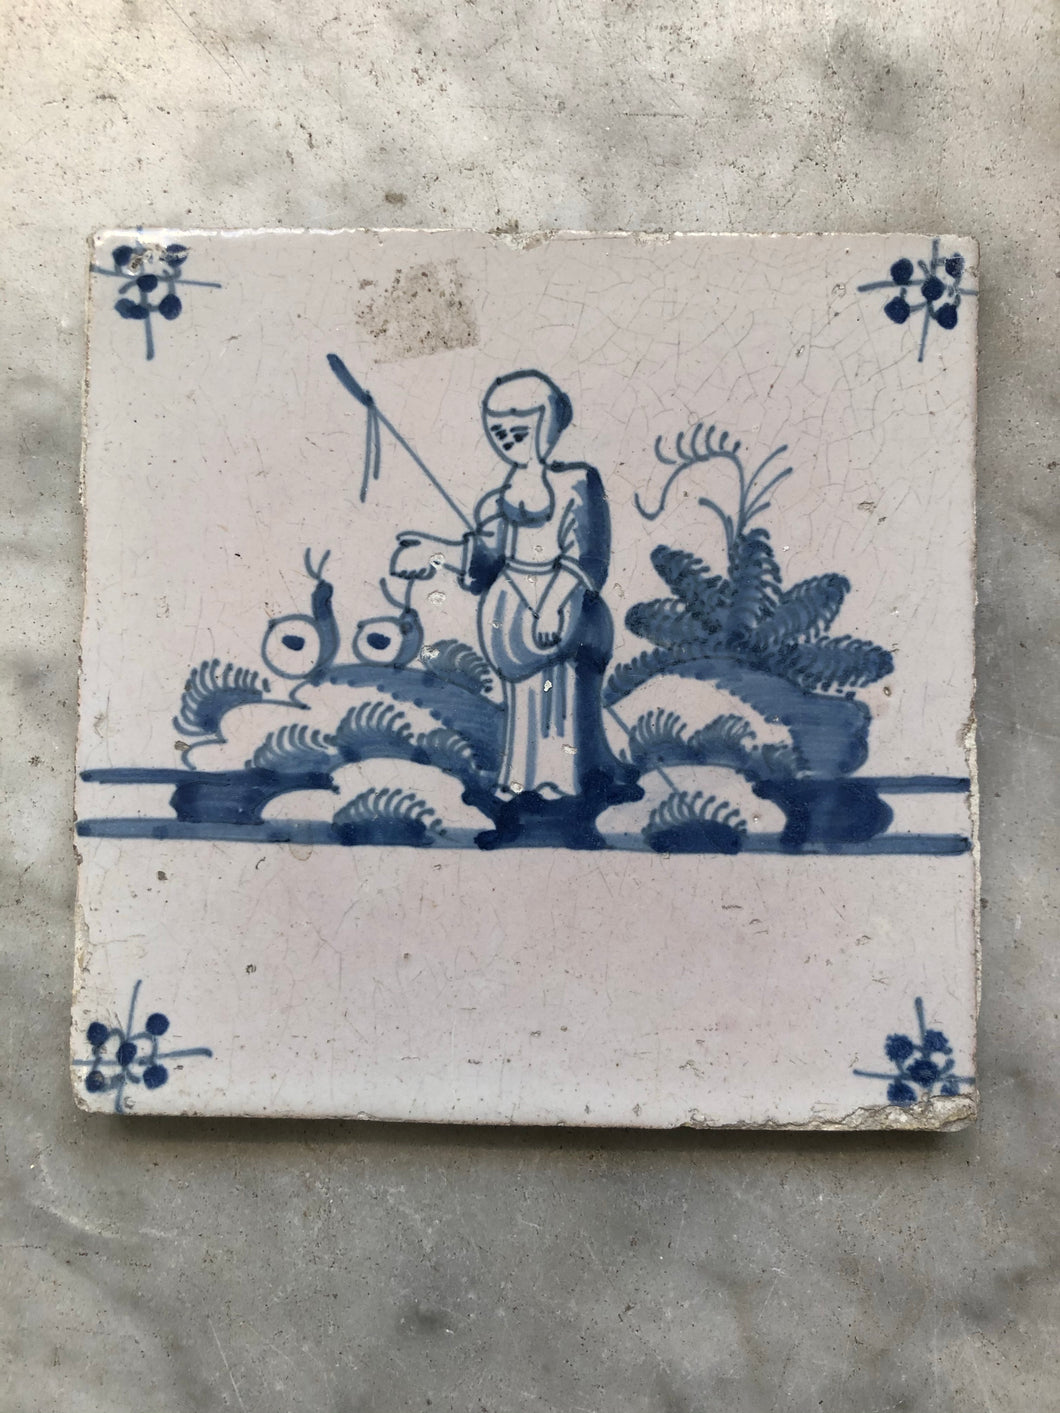 18th century Delft handpainted tile with shepard lady.